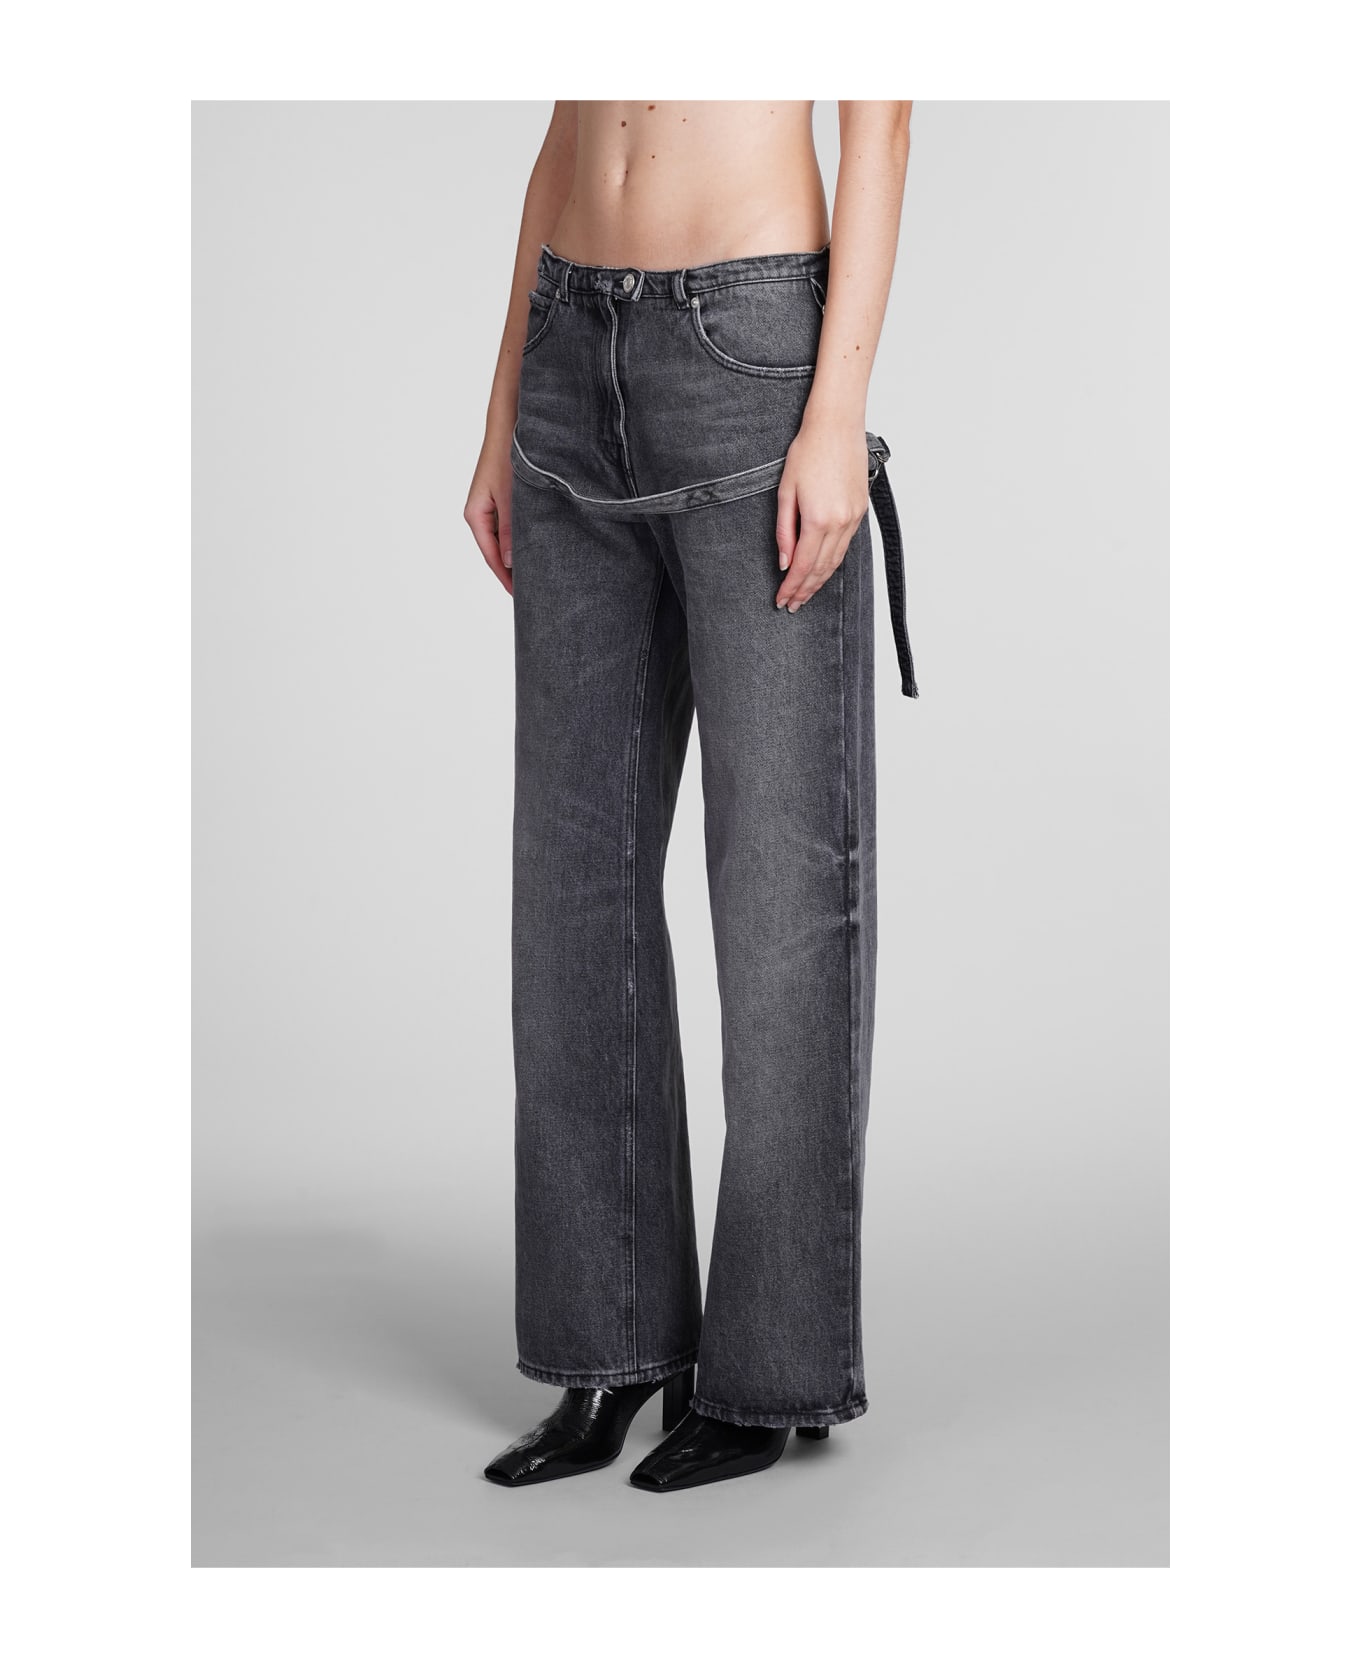 Courrèges Jeans In Grey Cotton - grey